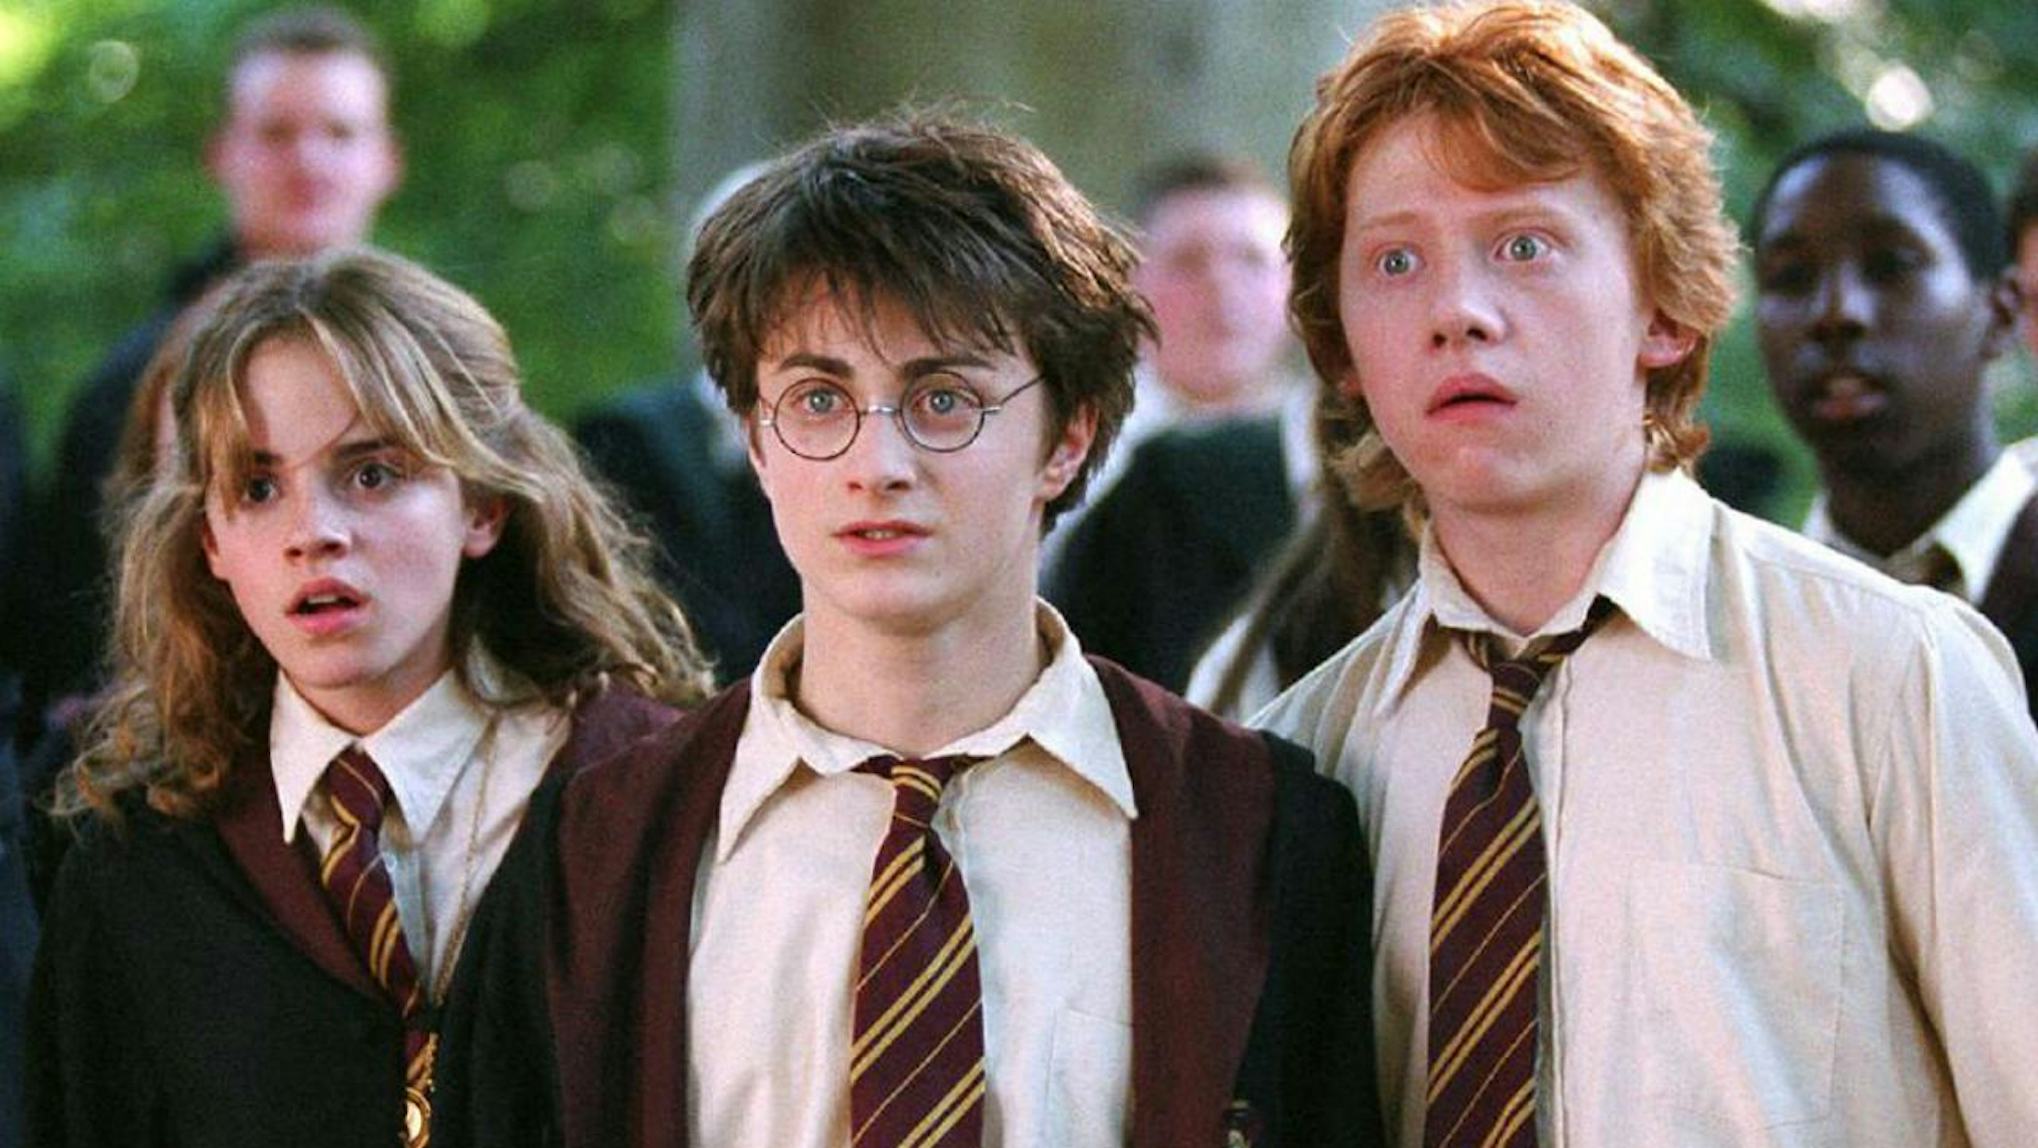 Here's Where To Stream 'Harry Potter' Now That The Freeform Marathons